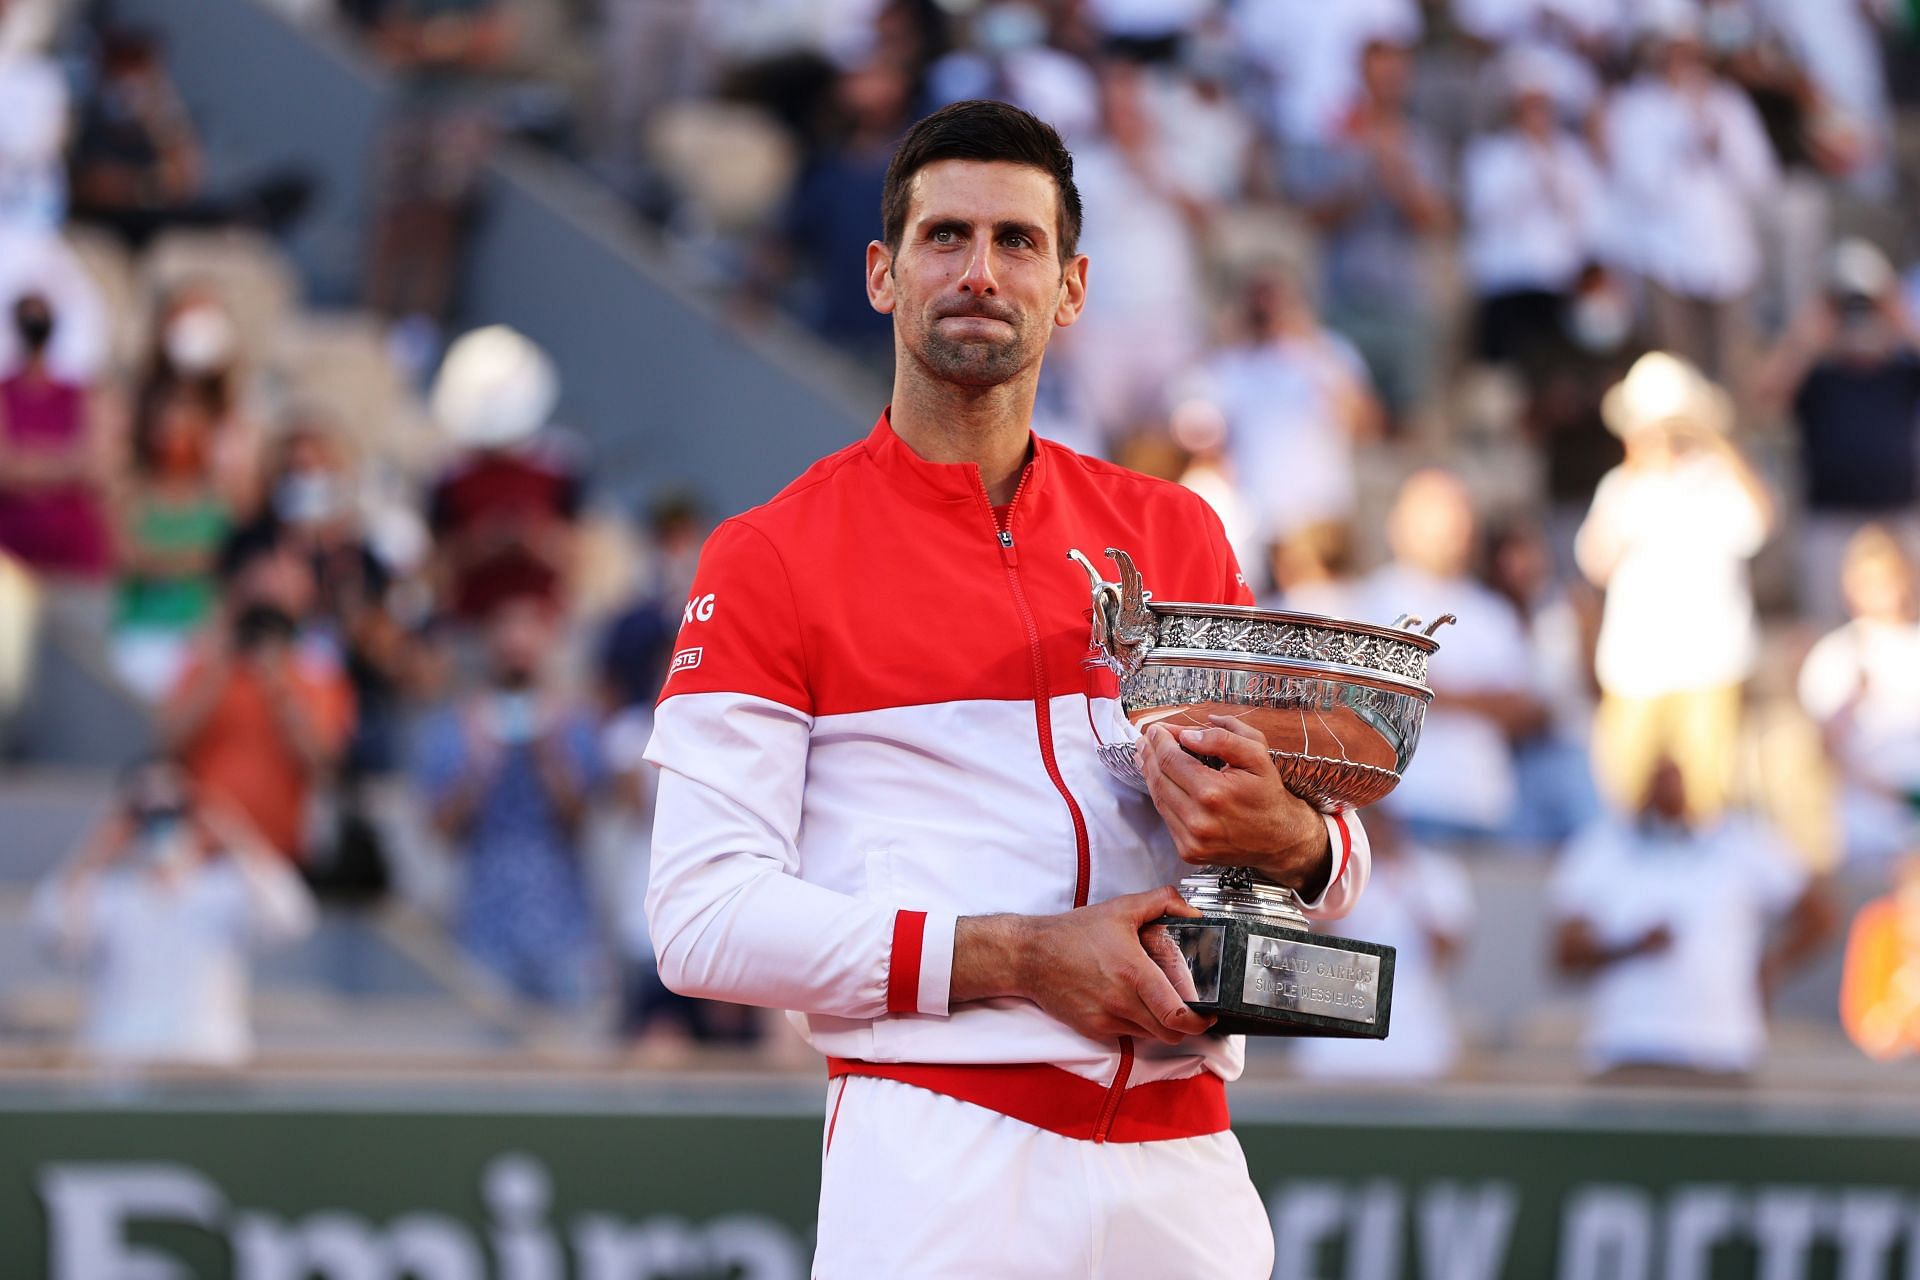 Novak Djokovic is all set to defend his title at the French Open this year